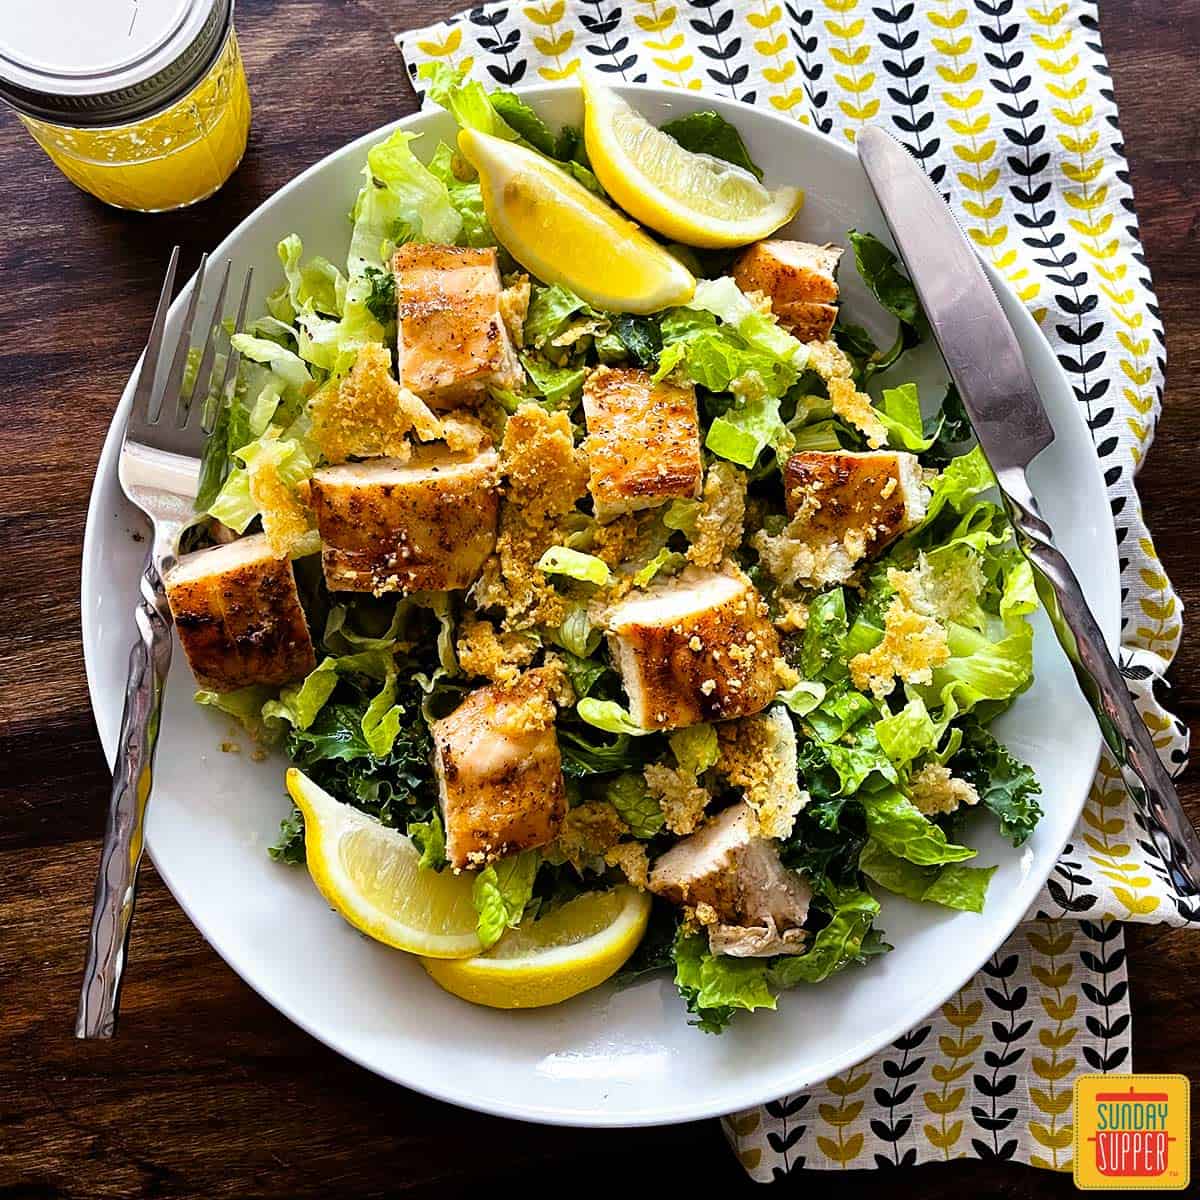 Chick-fil-A kale caesar salad on a plate with lemon wedges and grilled chicken